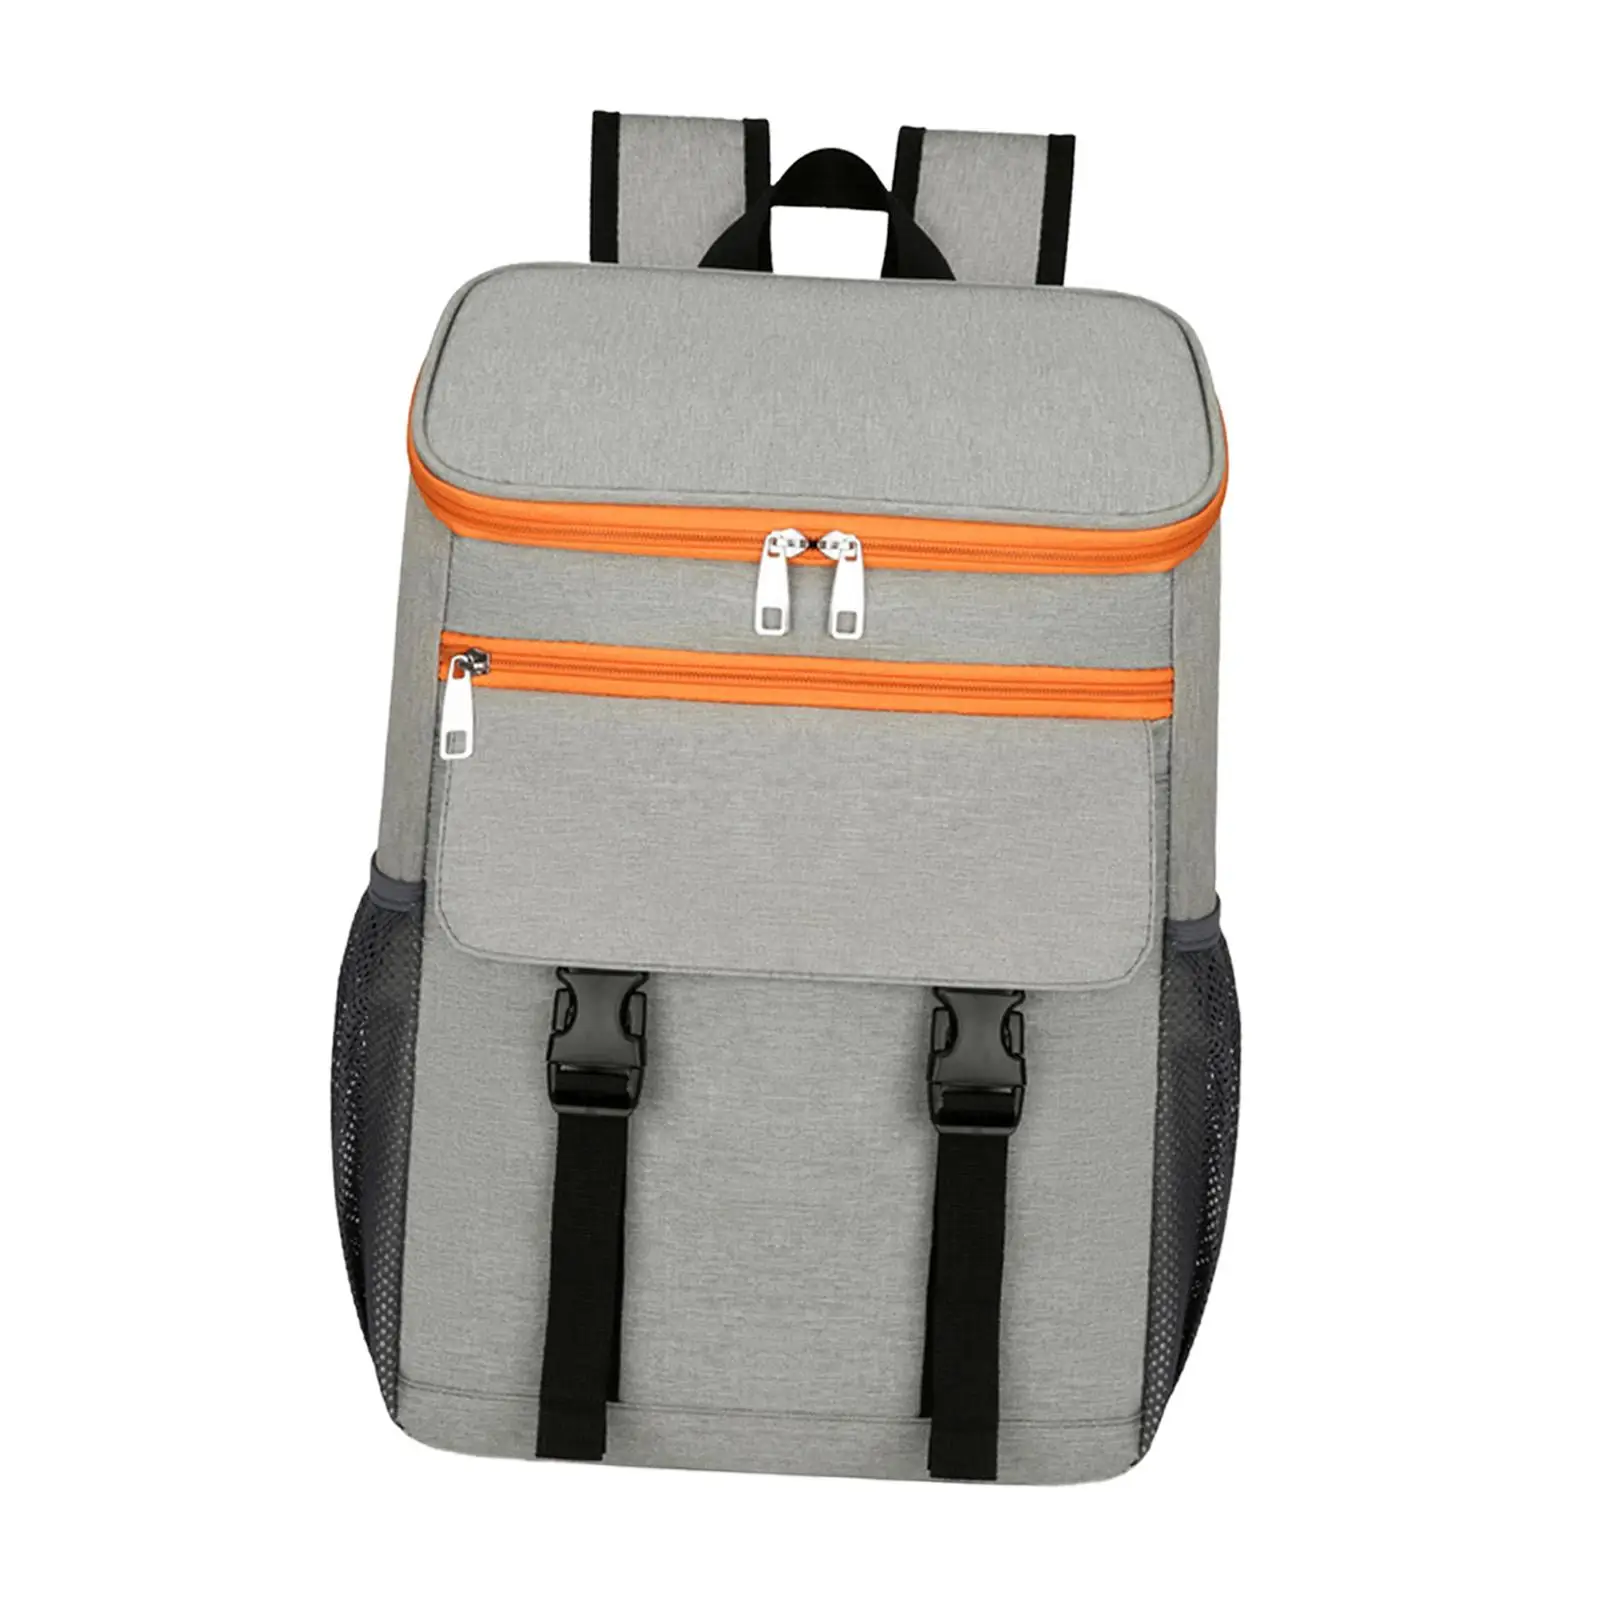 Backpack Large Insulated Cooler Bag Adults Zipper Waterproof Lunch Backpack for Picnic Travel Camping Work Lunch Fishing